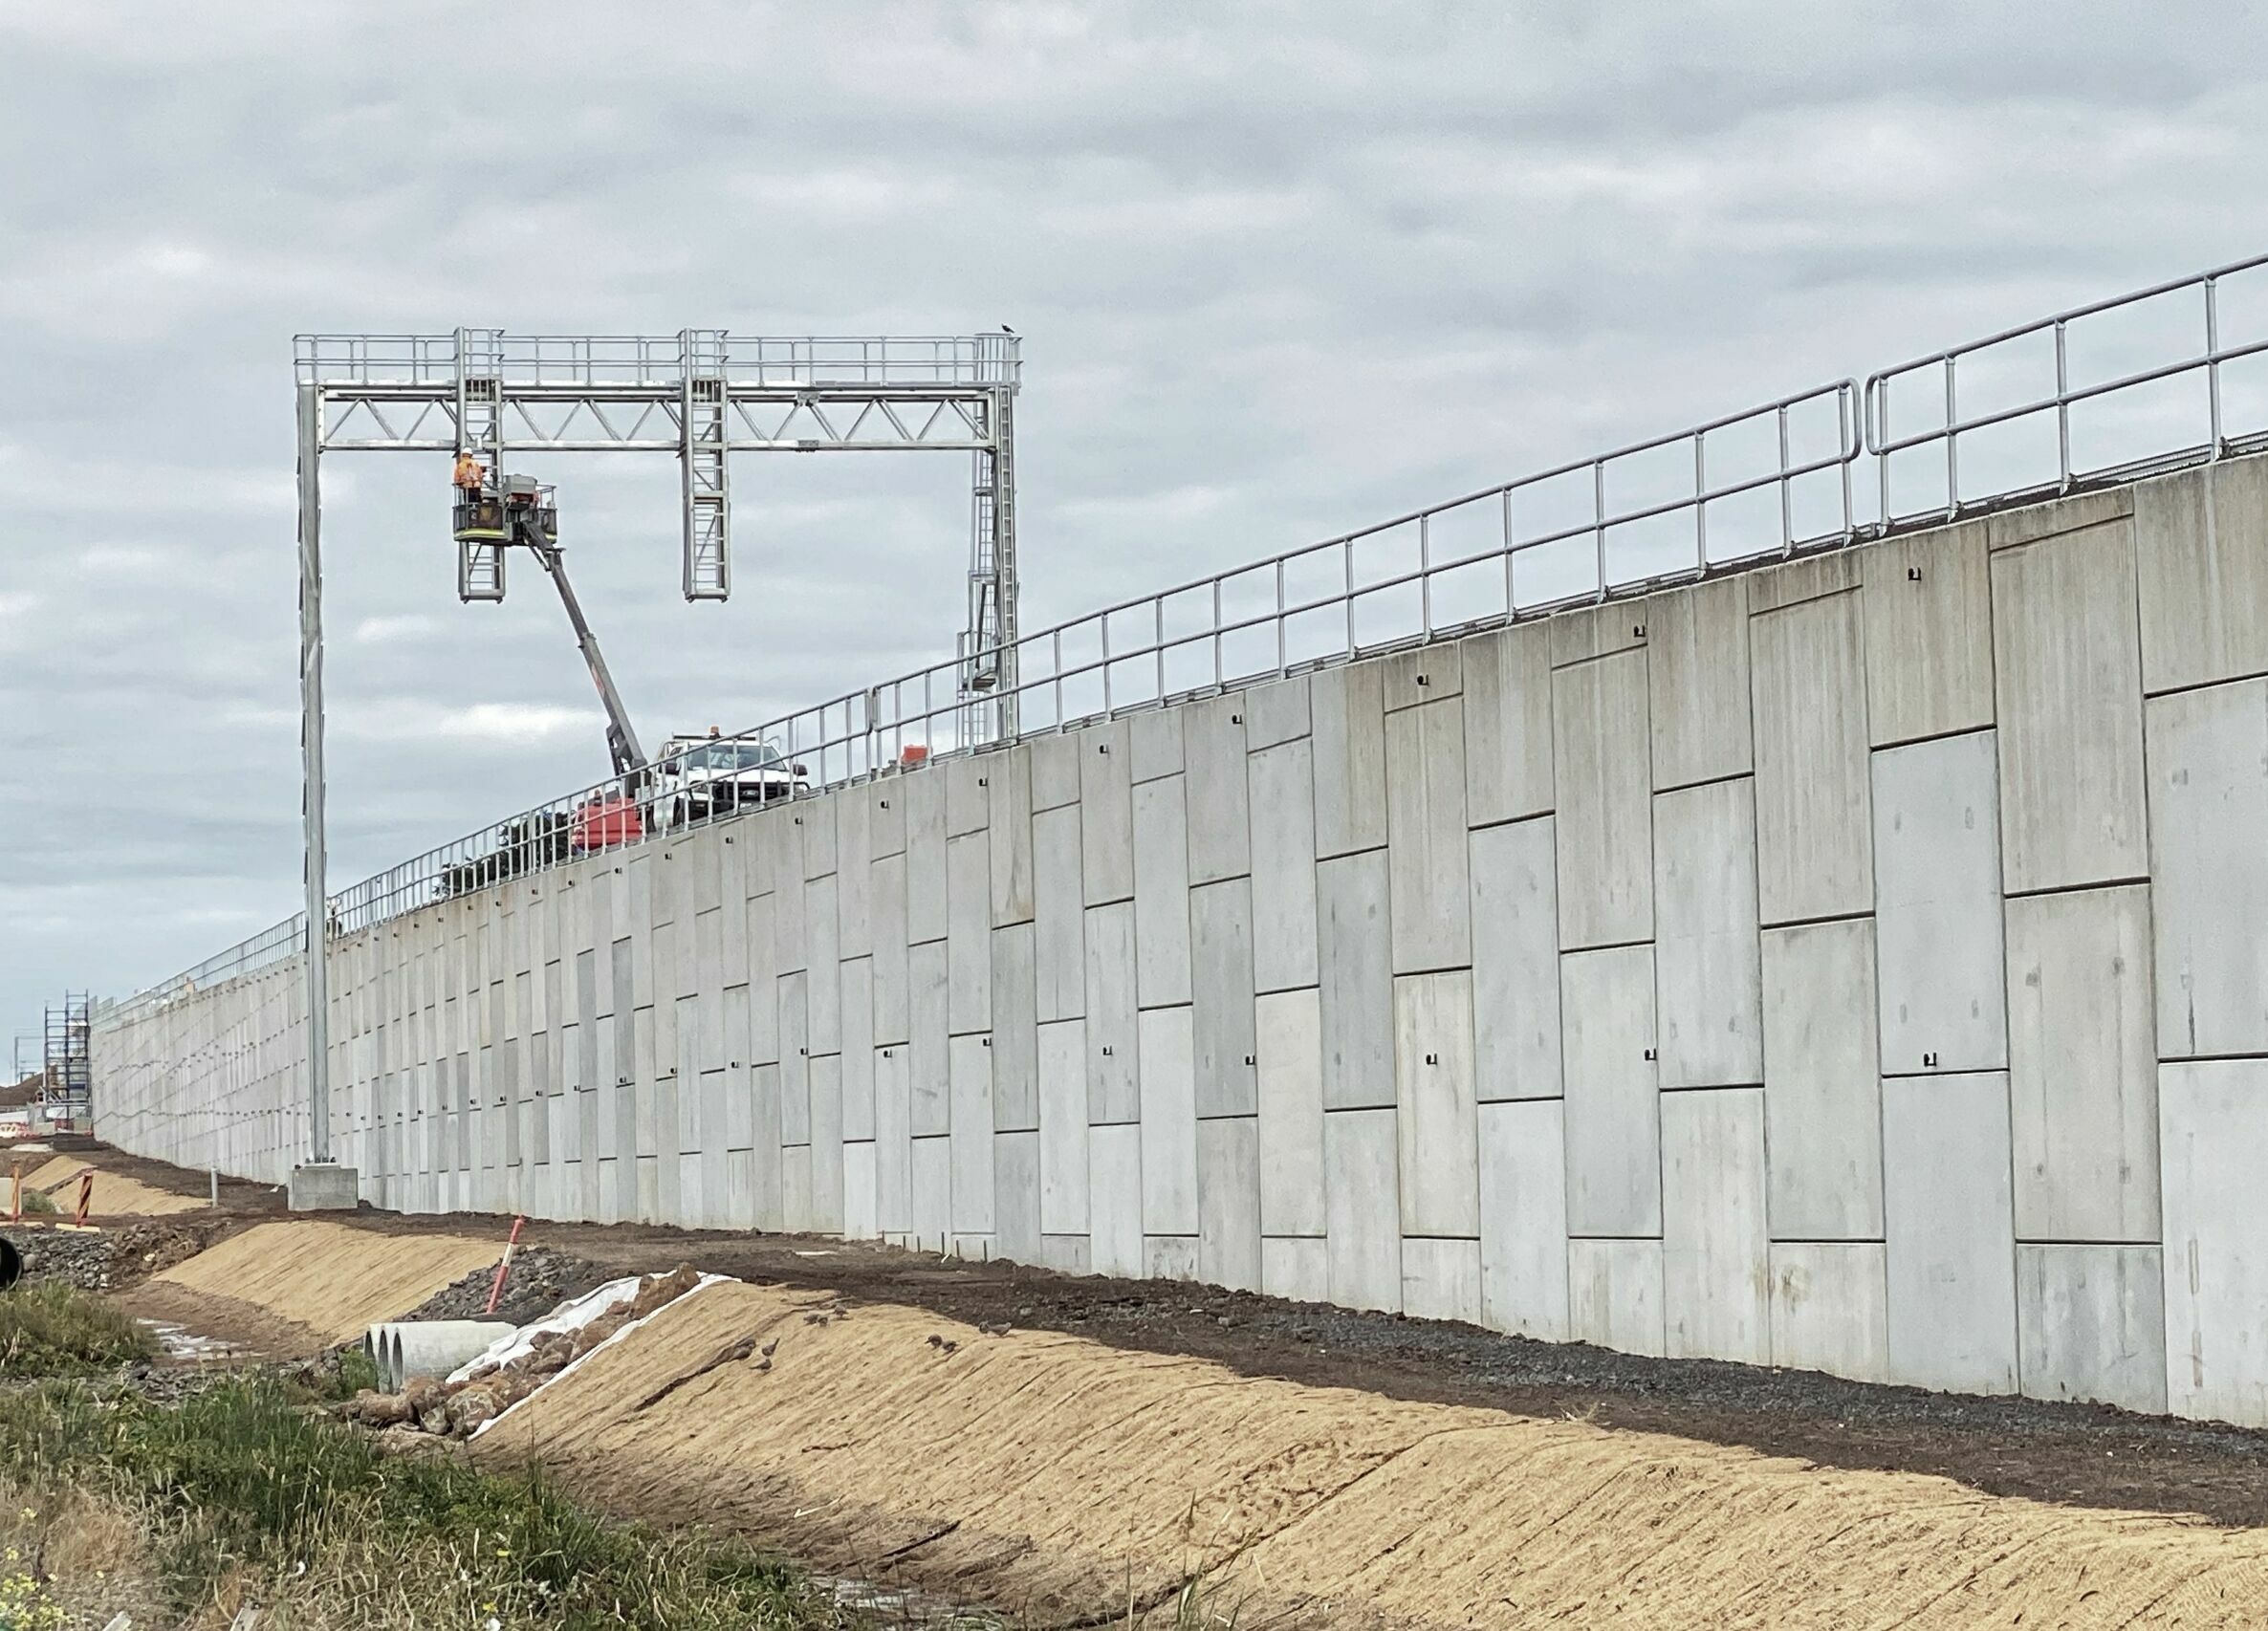 Reinforced Earth walls made of precast concrete and soil interaction structural supports at the South Geelong to Waurn Ponds Duplication Rail Project in Victoria, Australia